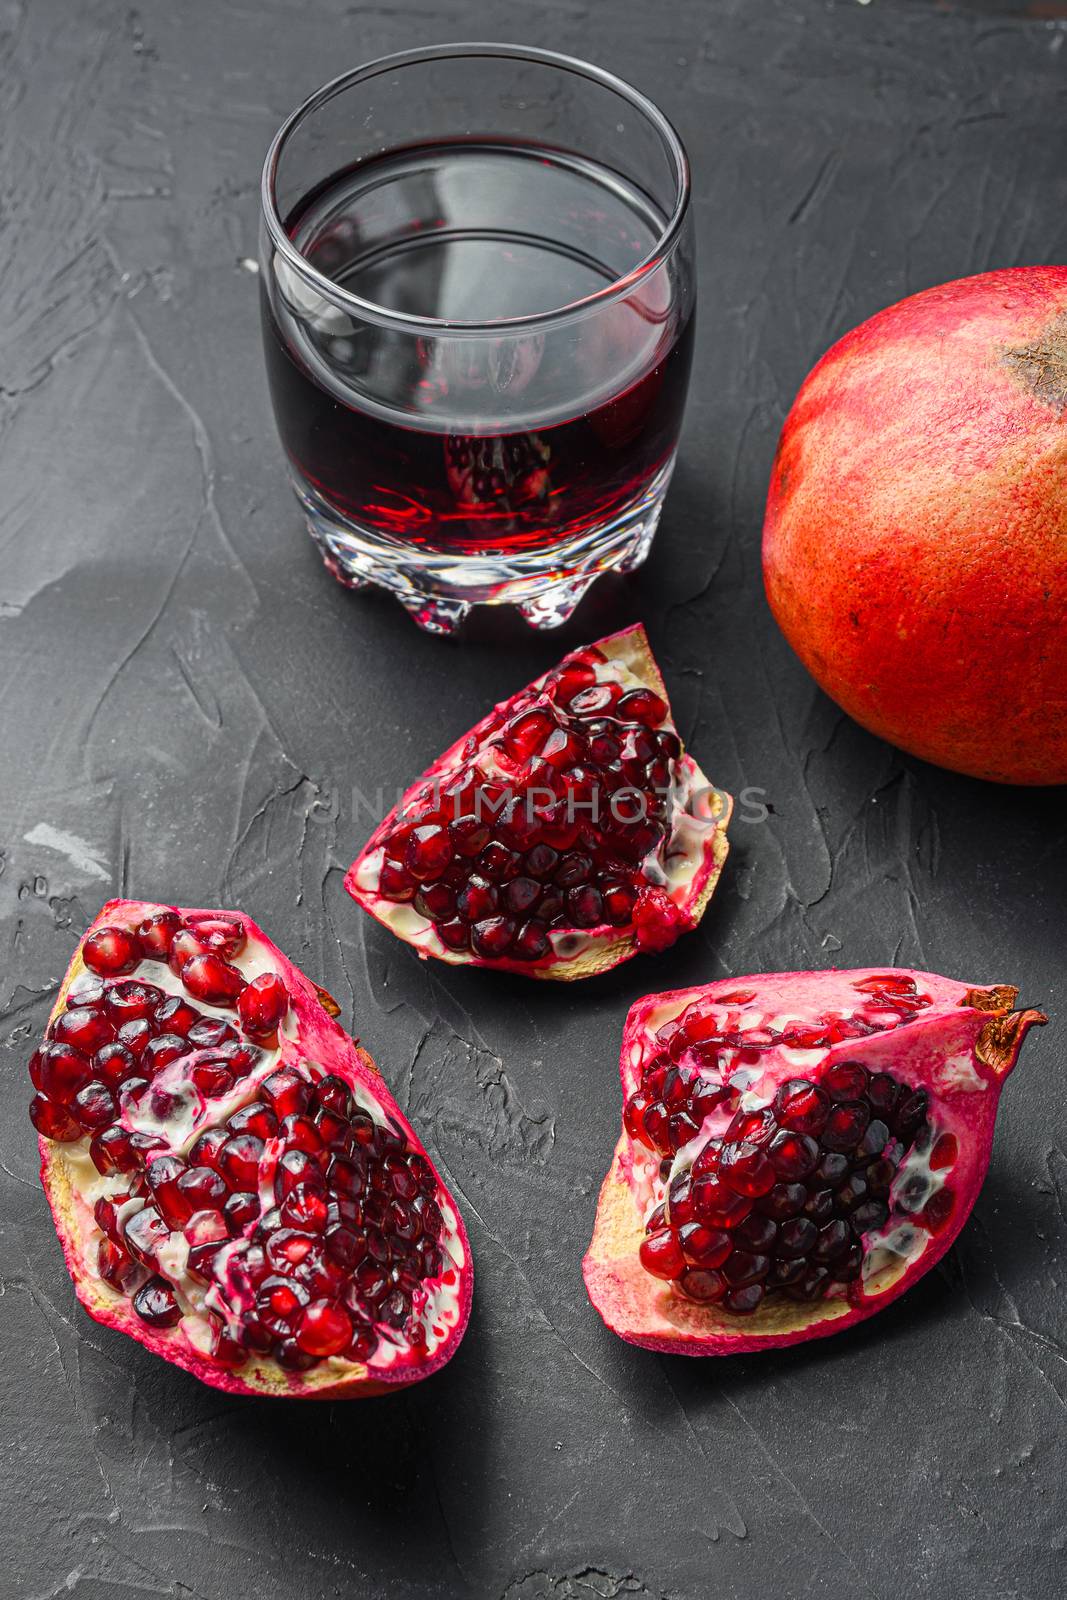 Pomegranate cuts with seeds in front of garnet cut and juice in glass side view, on black background, selective focus by Ilianesolenyi